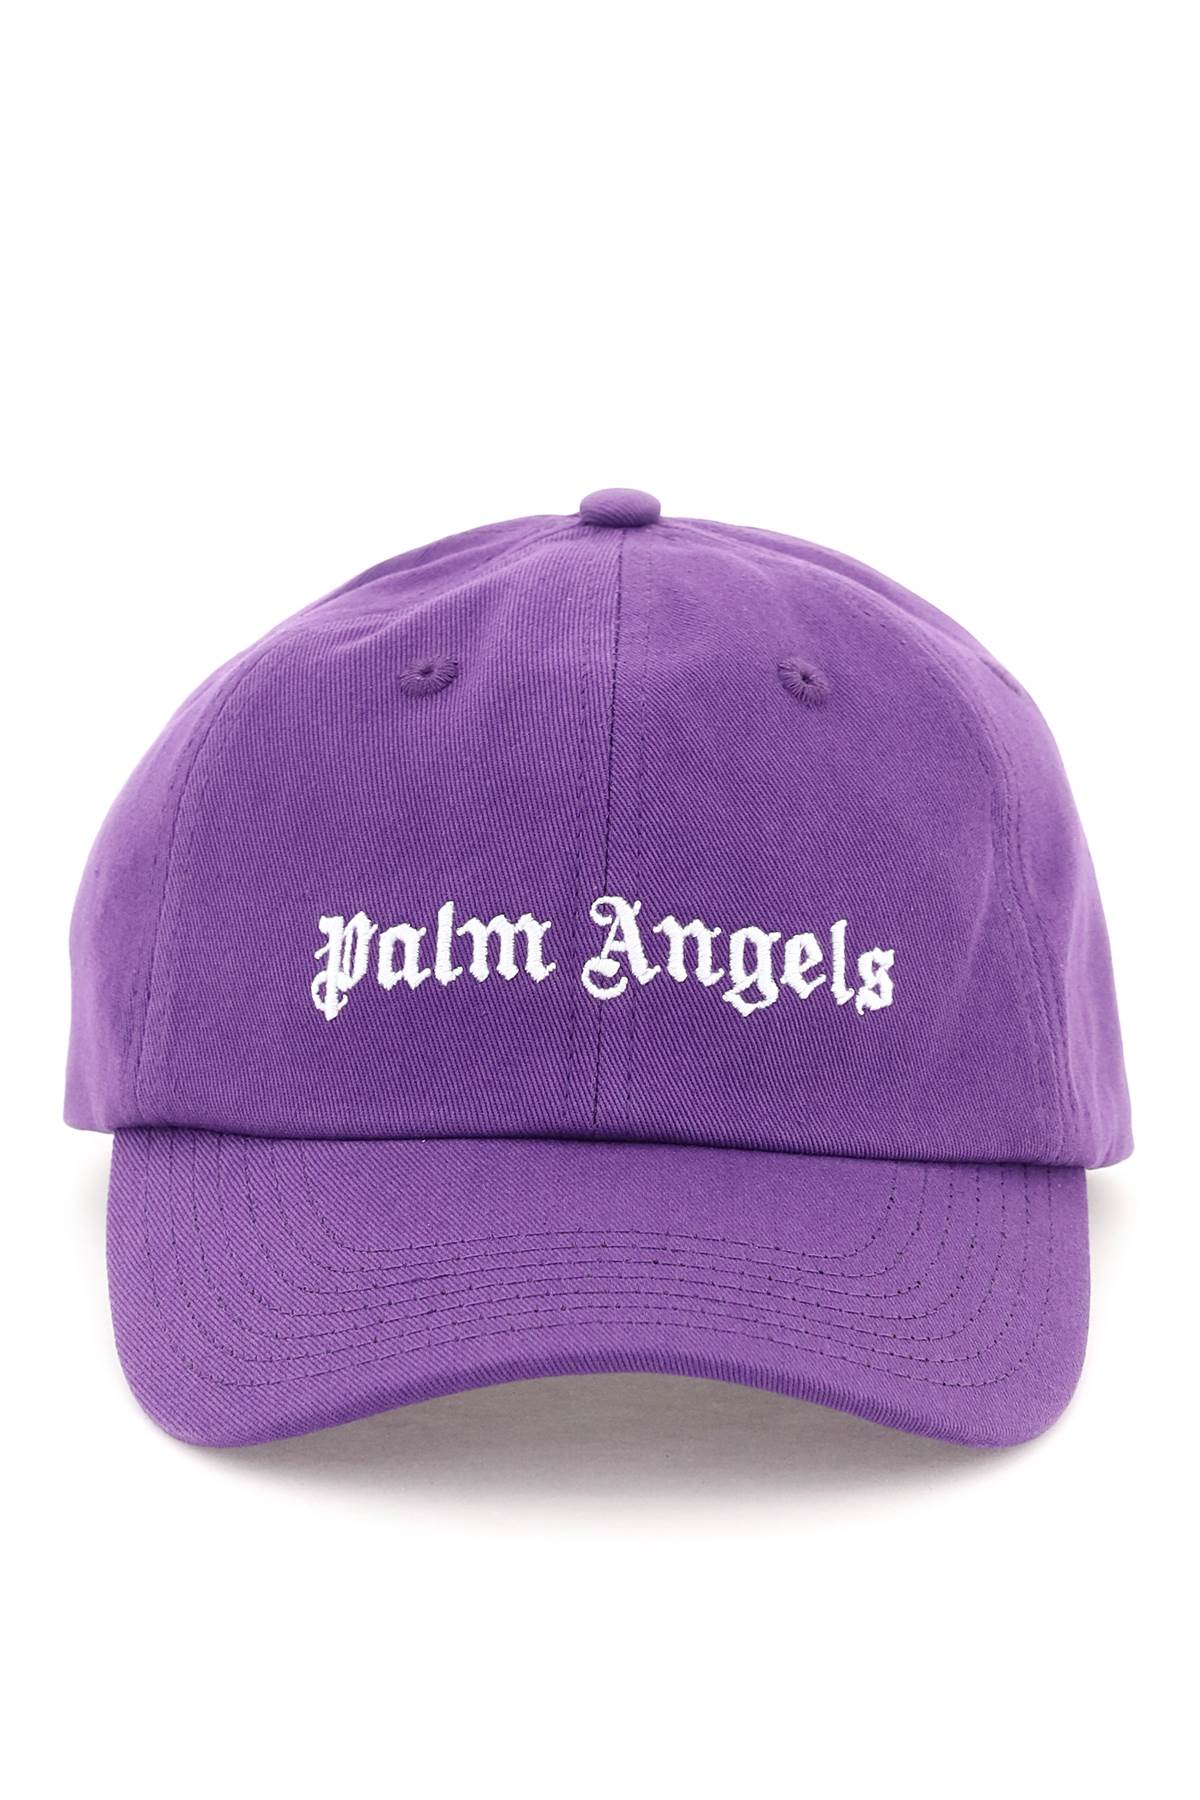 PALM ANGELS PURPLE BASEBALL HAT WITH WHITE FRONT AND BACK LOGO